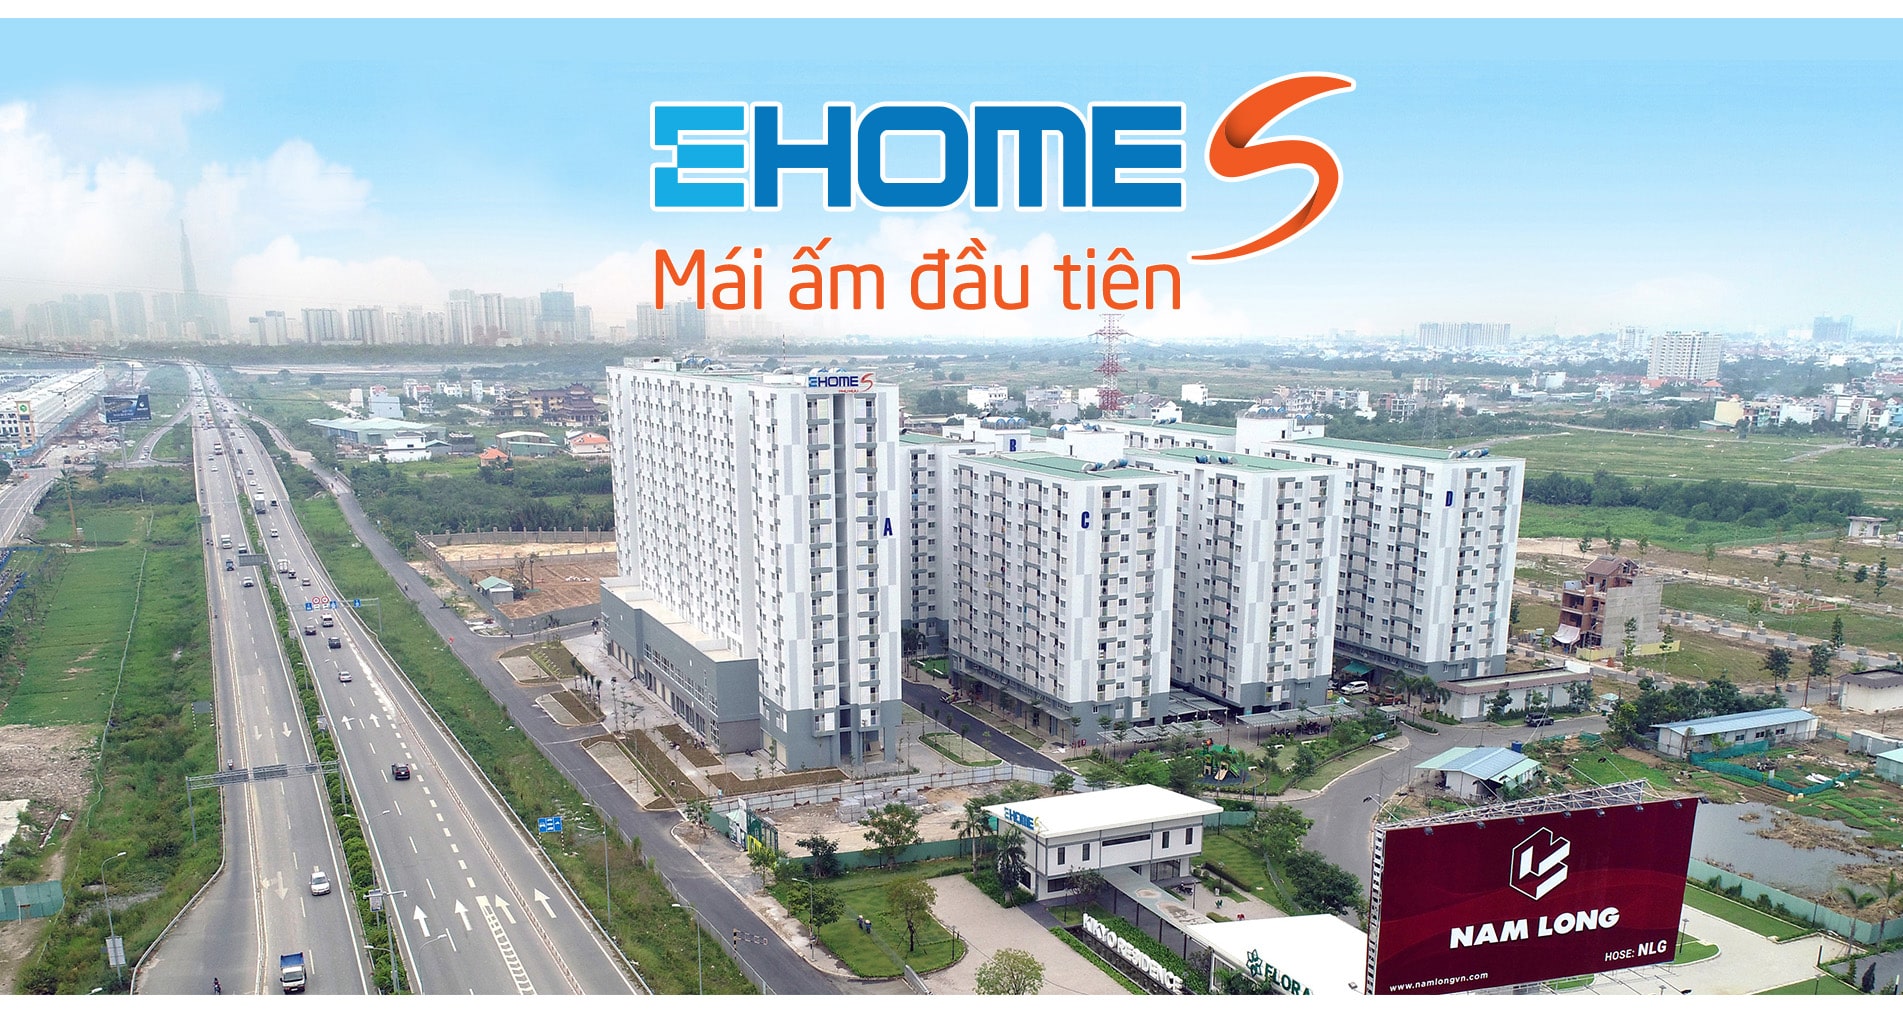 banner EHOMES - NAM LONG GROUP (NLG)